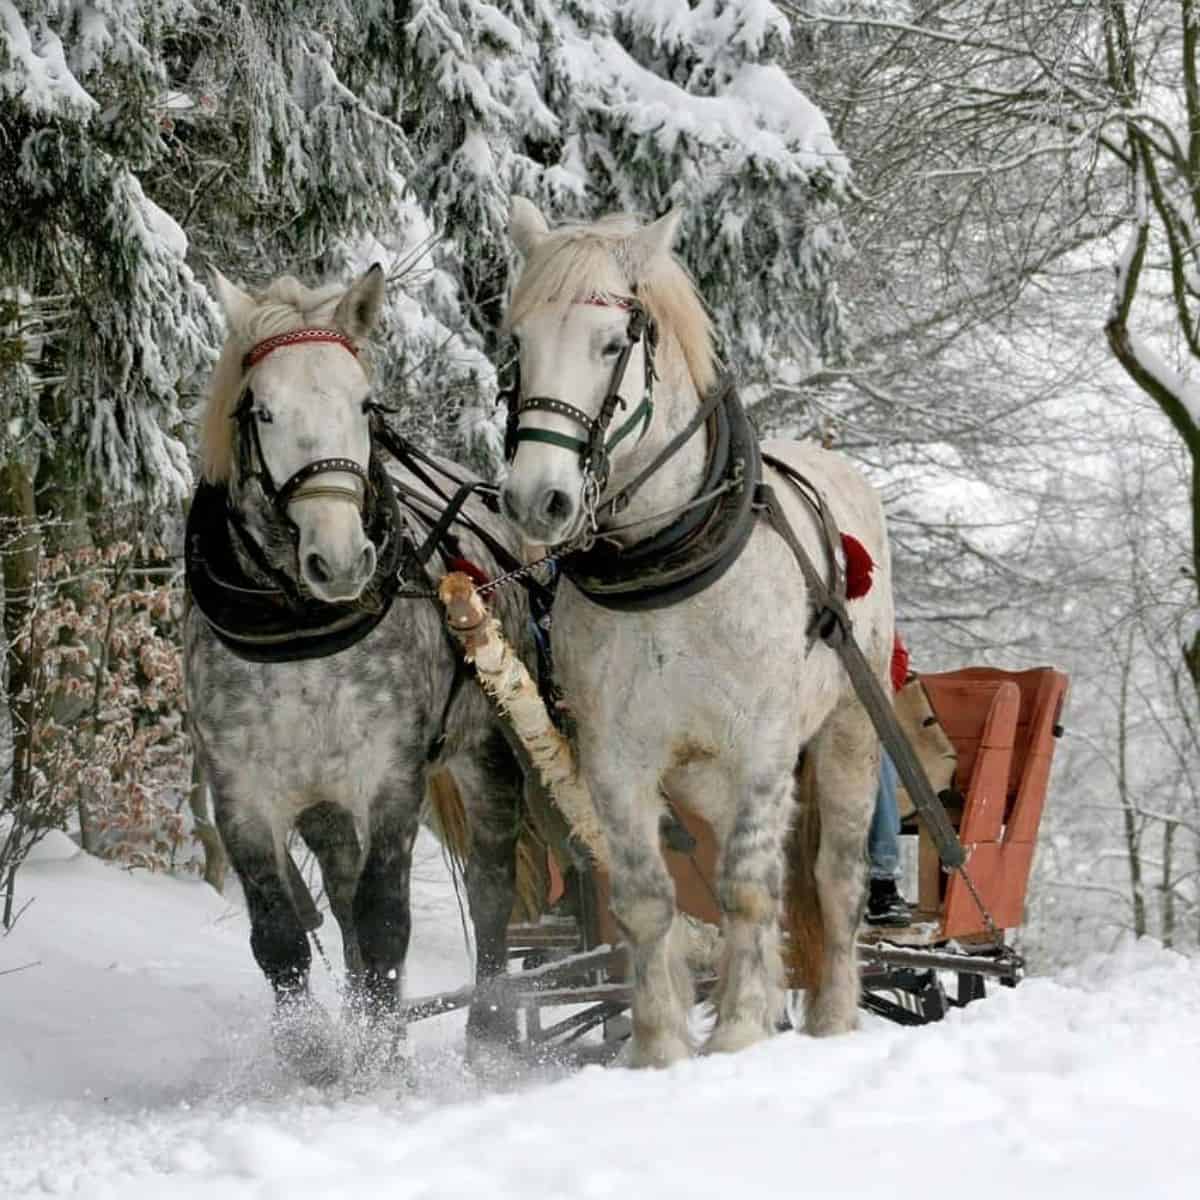 white horses pulling a sleigh in the snow.